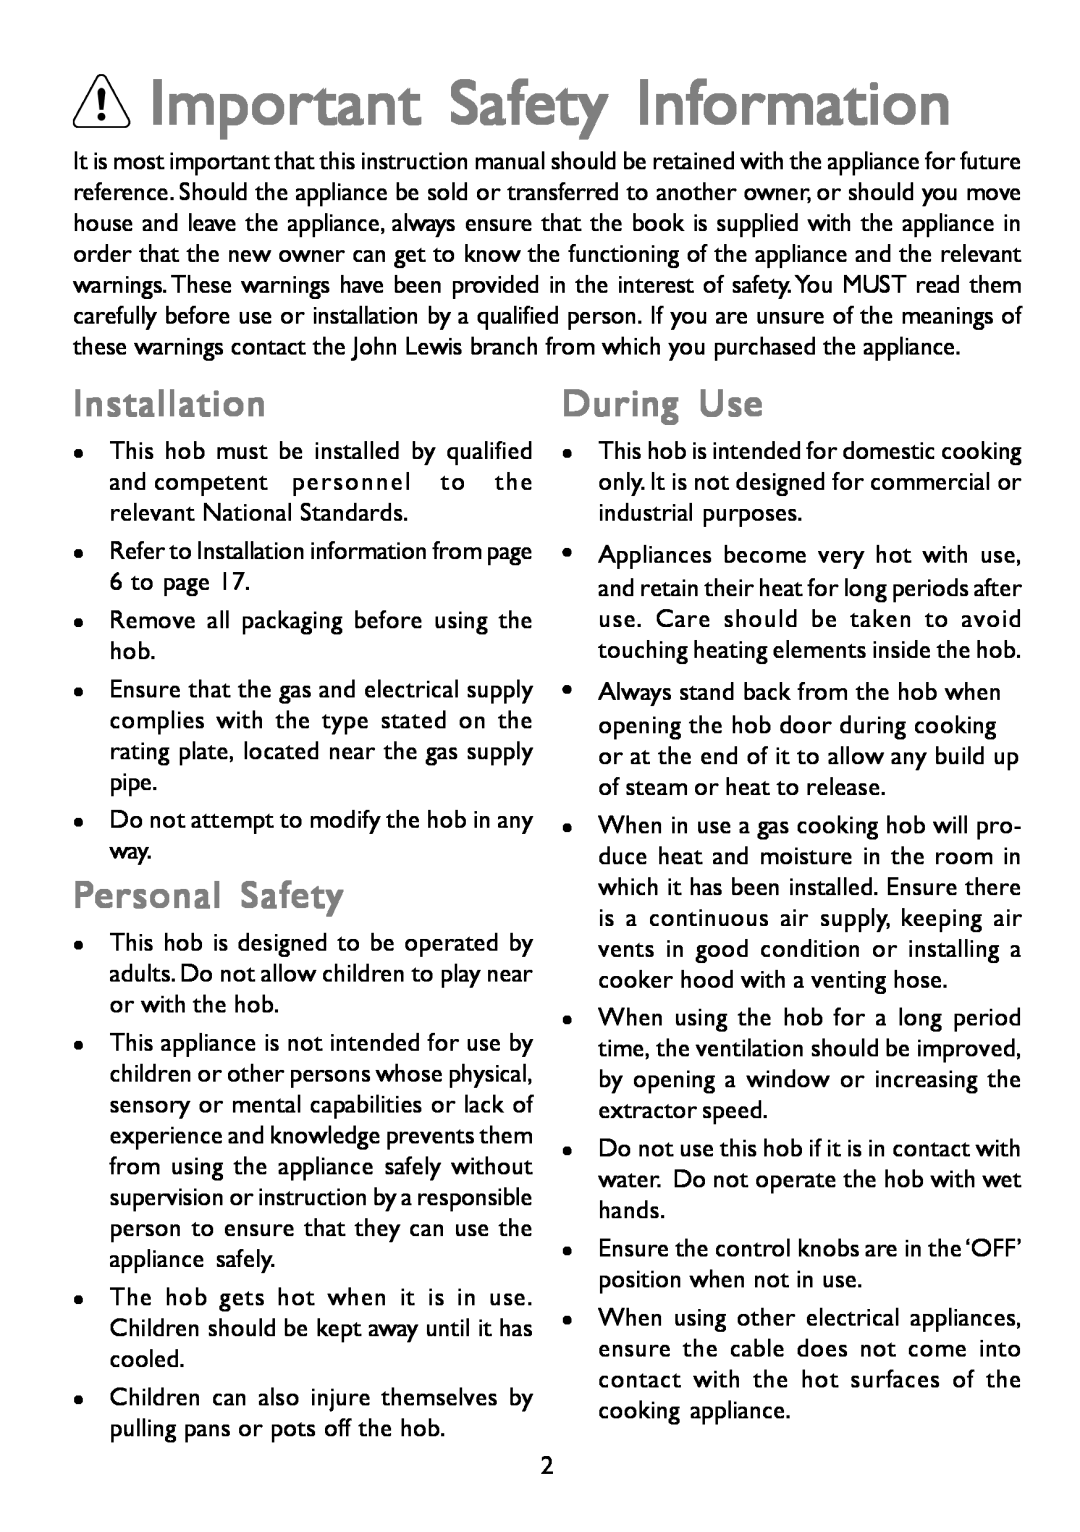 John Lewis JLBIGH753 instruction manual Important Safety Information, Installation, Personal Safety, During Use 